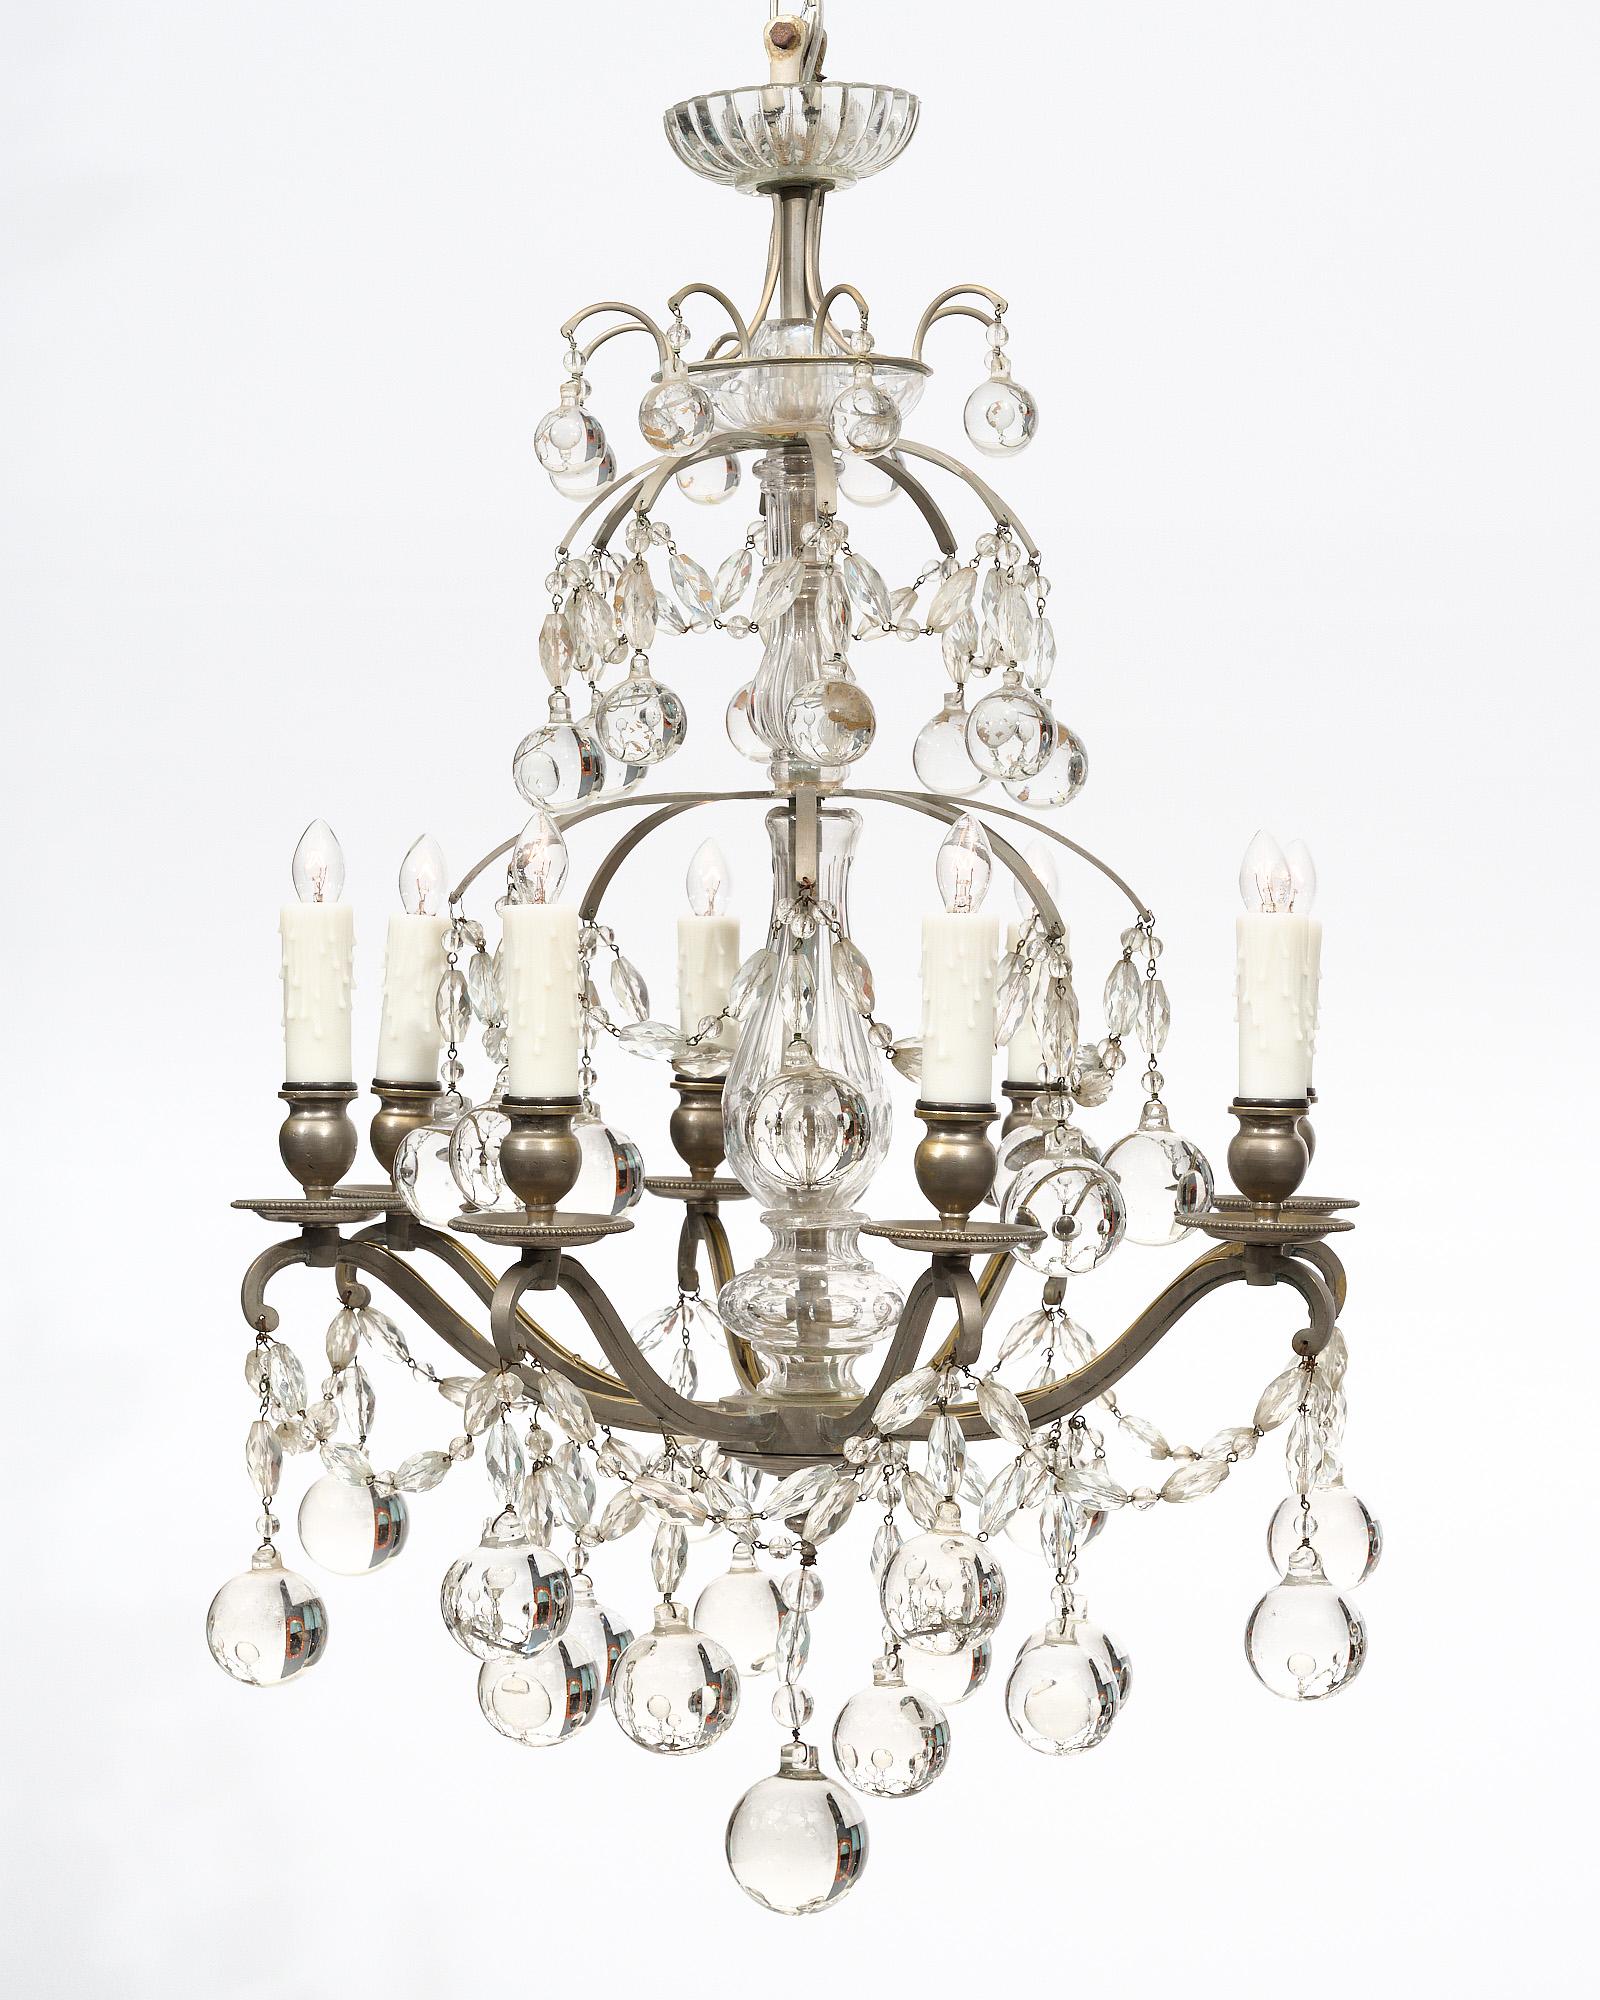 Chandelier from France by Baccarat. This fixtures features glass crystal adornment and spheric drops. The structure is pewter. It has been newly wired to fit US standards.
The current overall height is 48.75